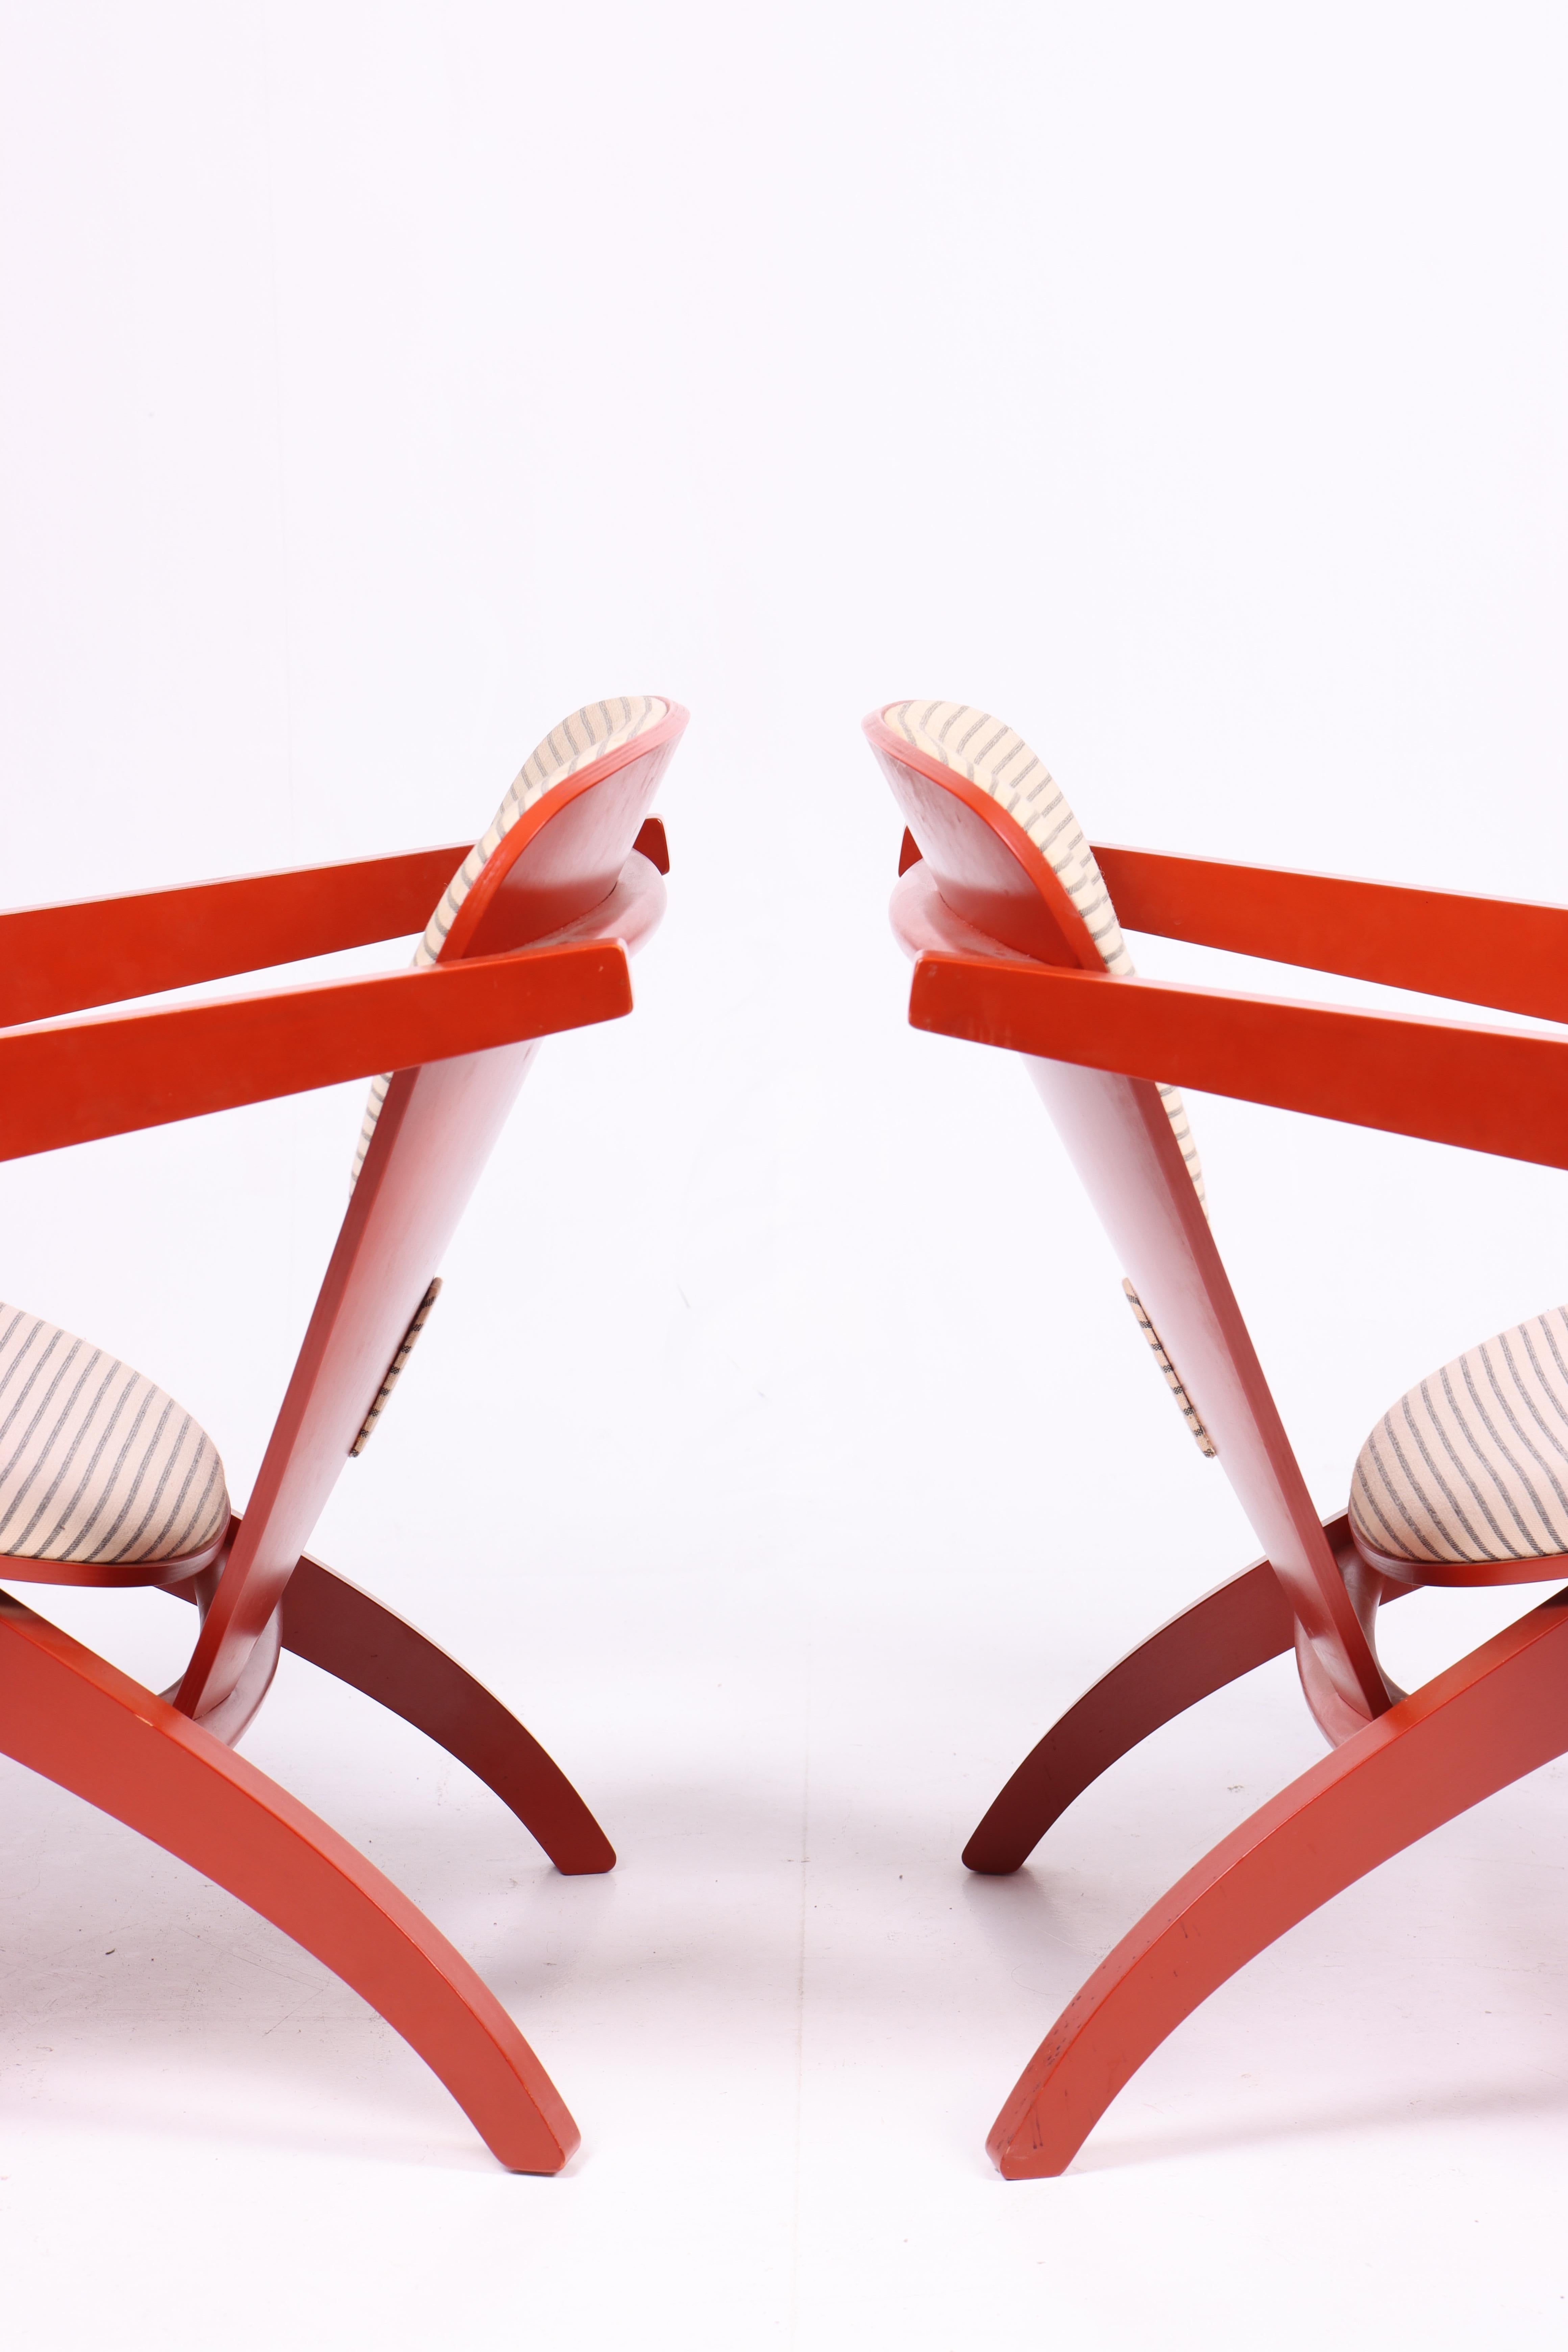 Danish Pair of Lounge Chairs Model Ge460 by Hans Wegner, 1970s For Sale